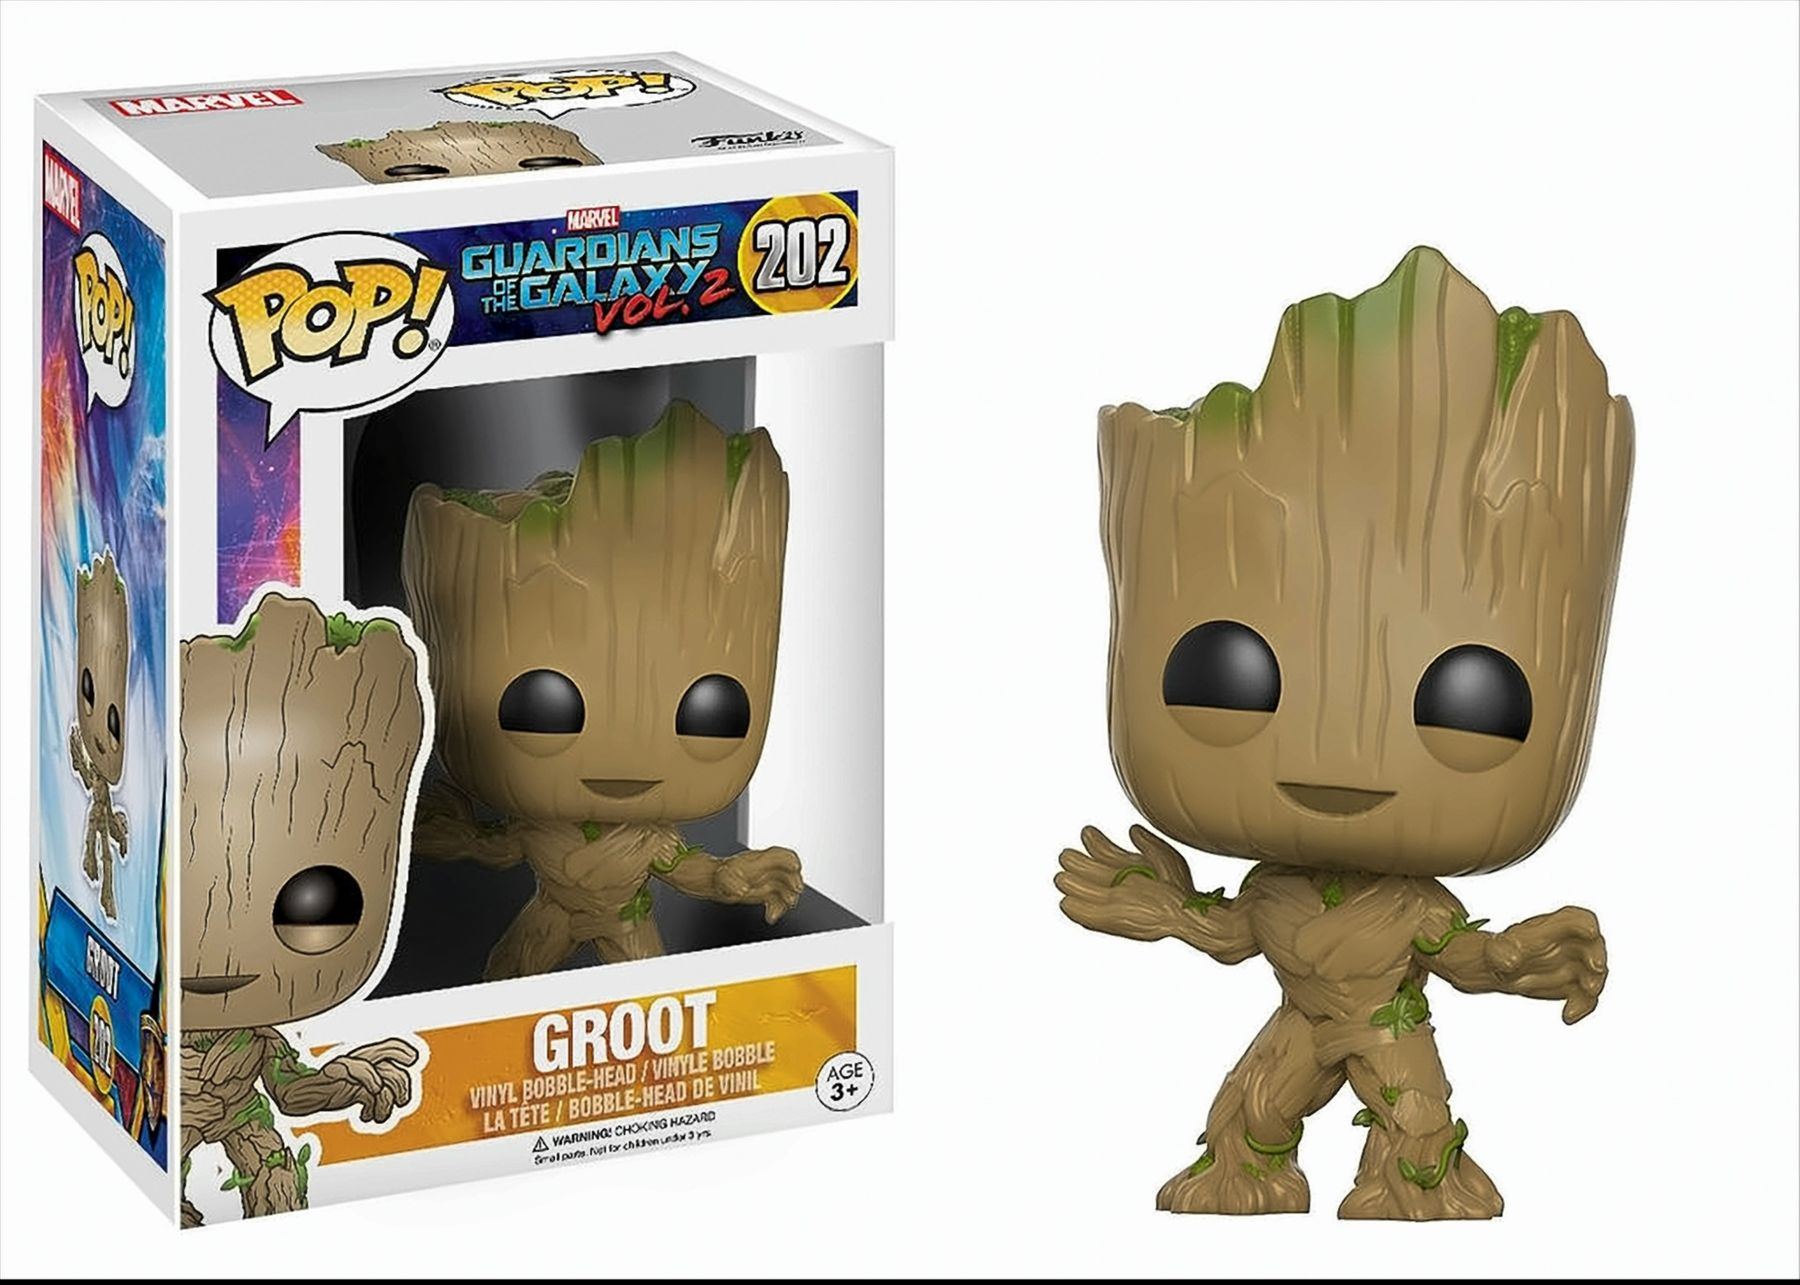 Funko Pop the Galaxy Guardians Groot 2 - - of